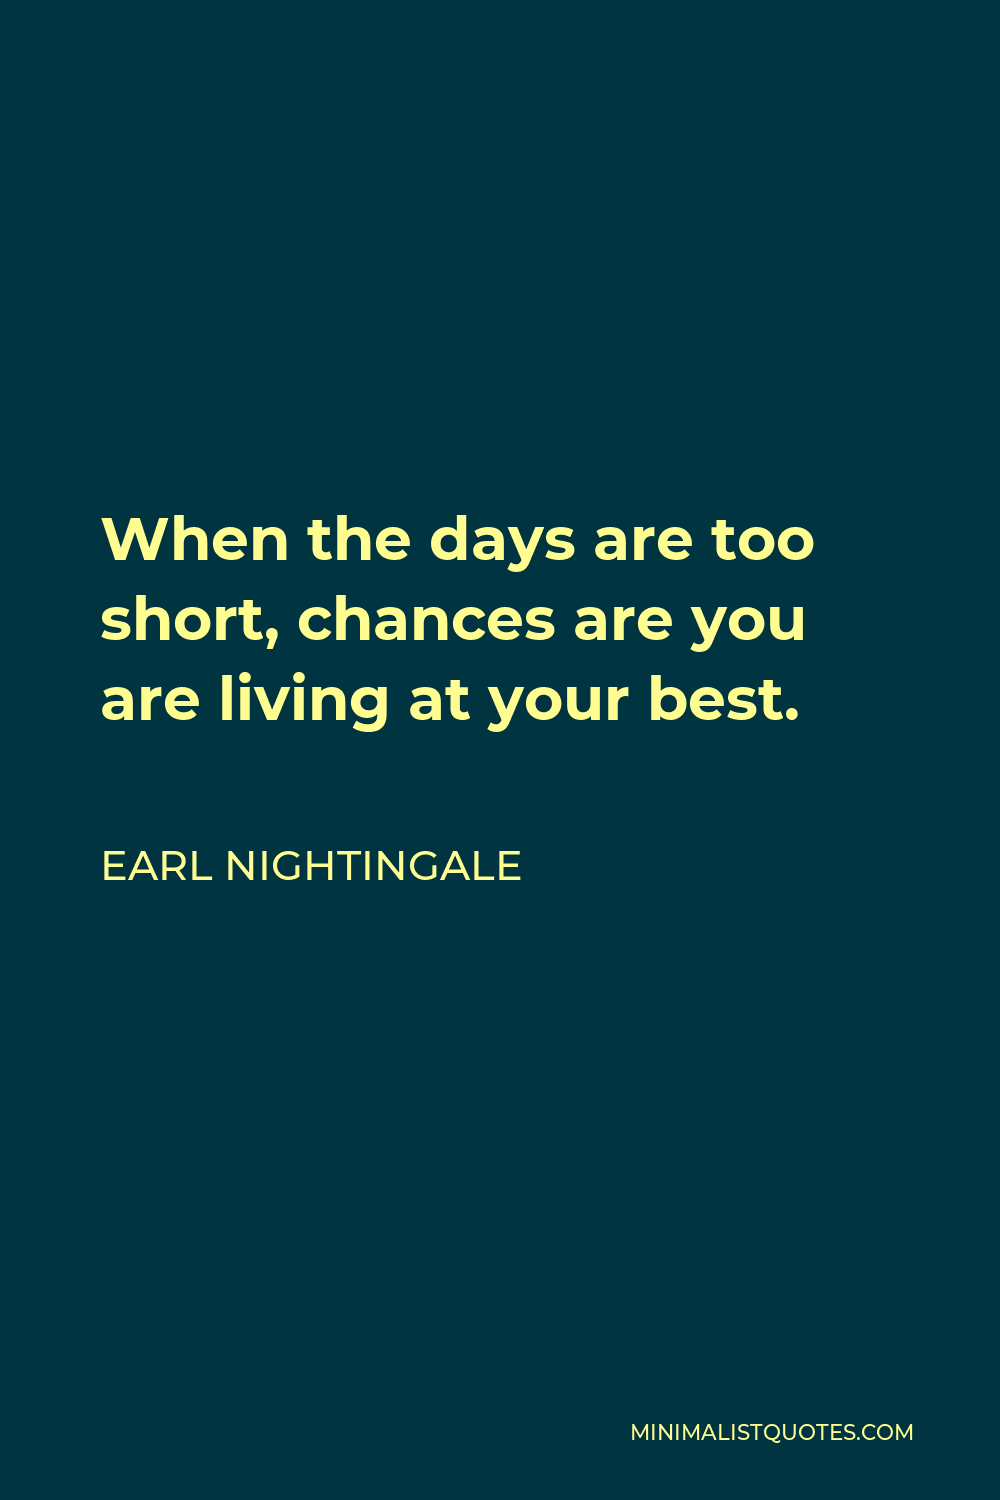 Earl Nightingale Quote - When the days are too short, chances are you are living at your best.